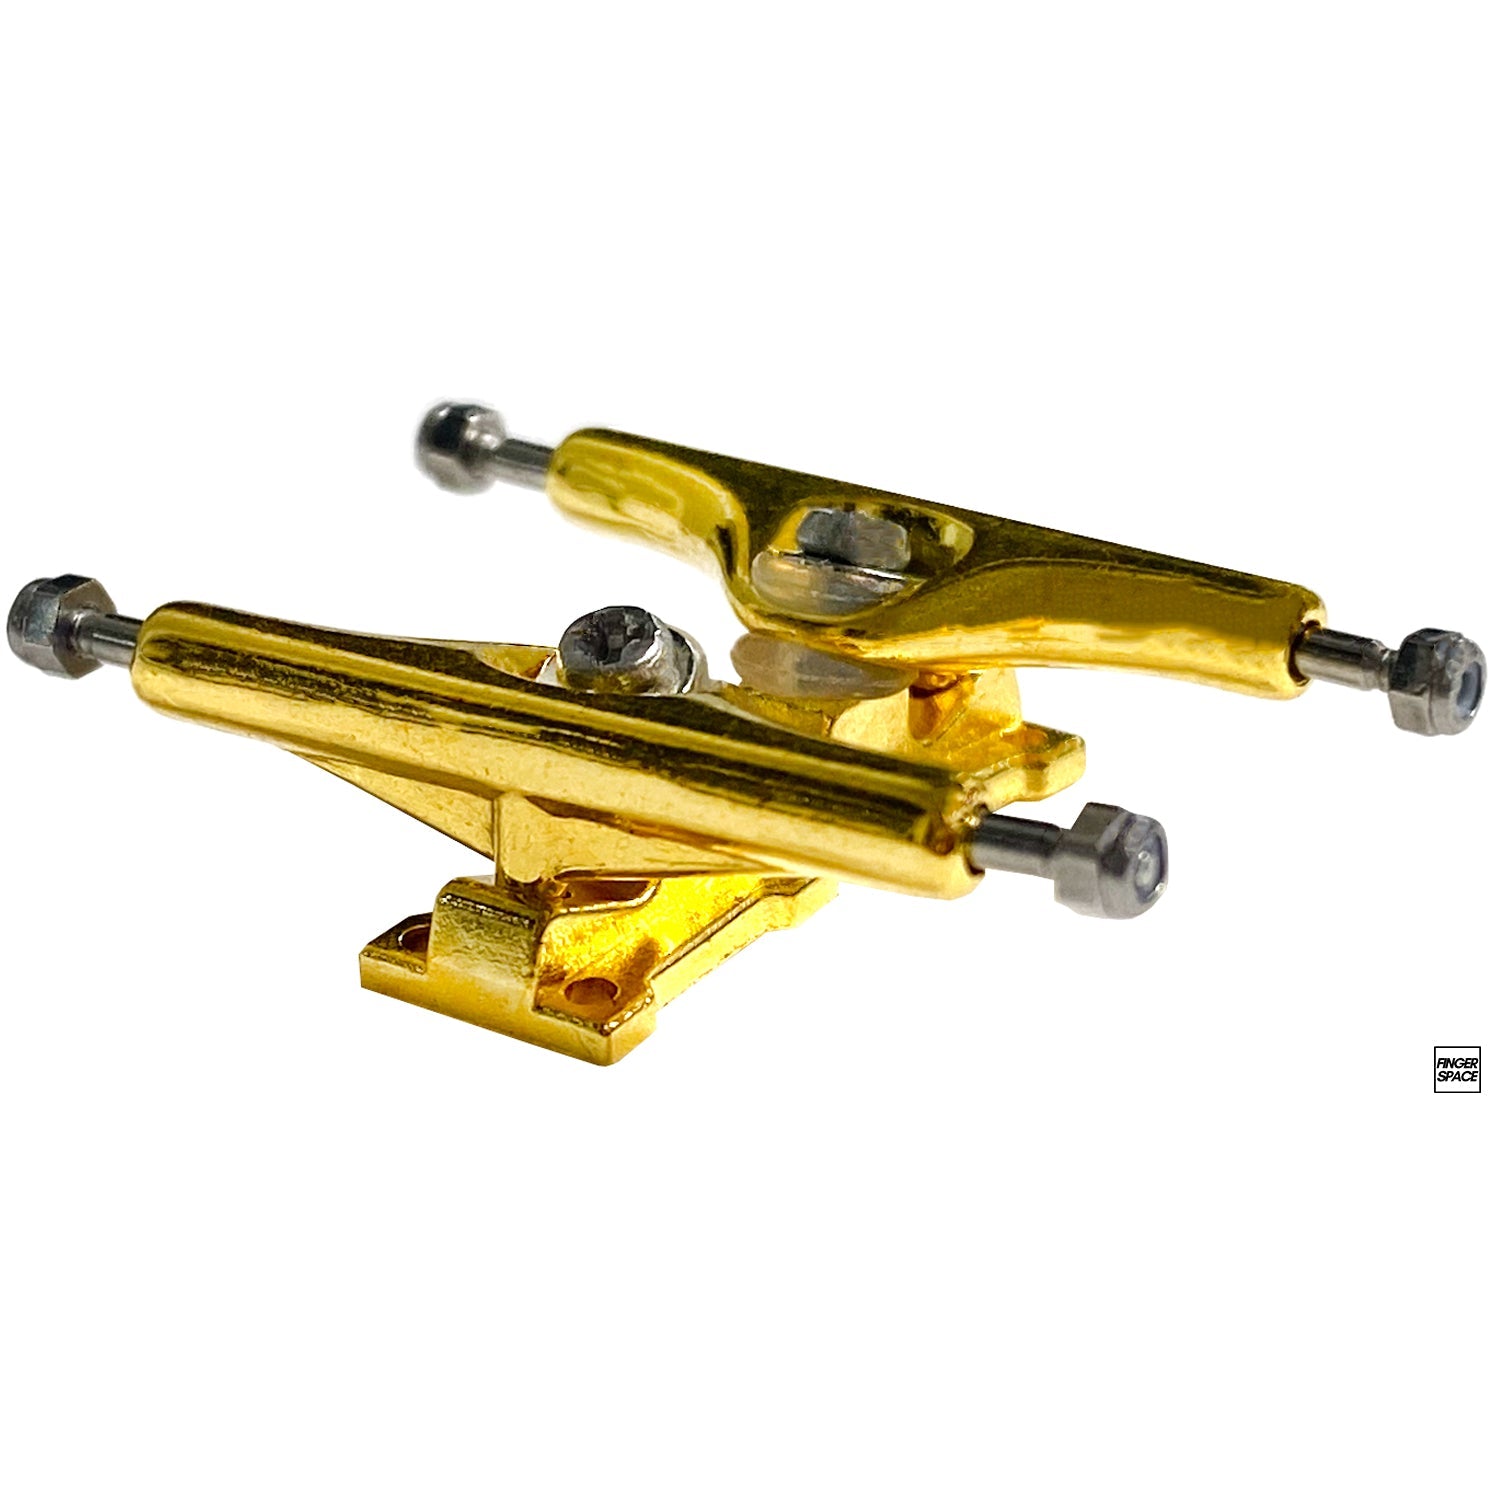 32mm Olympus Pro Fingerboard Trucks - "Golden Athena" Colorway with Inverted Kingpins